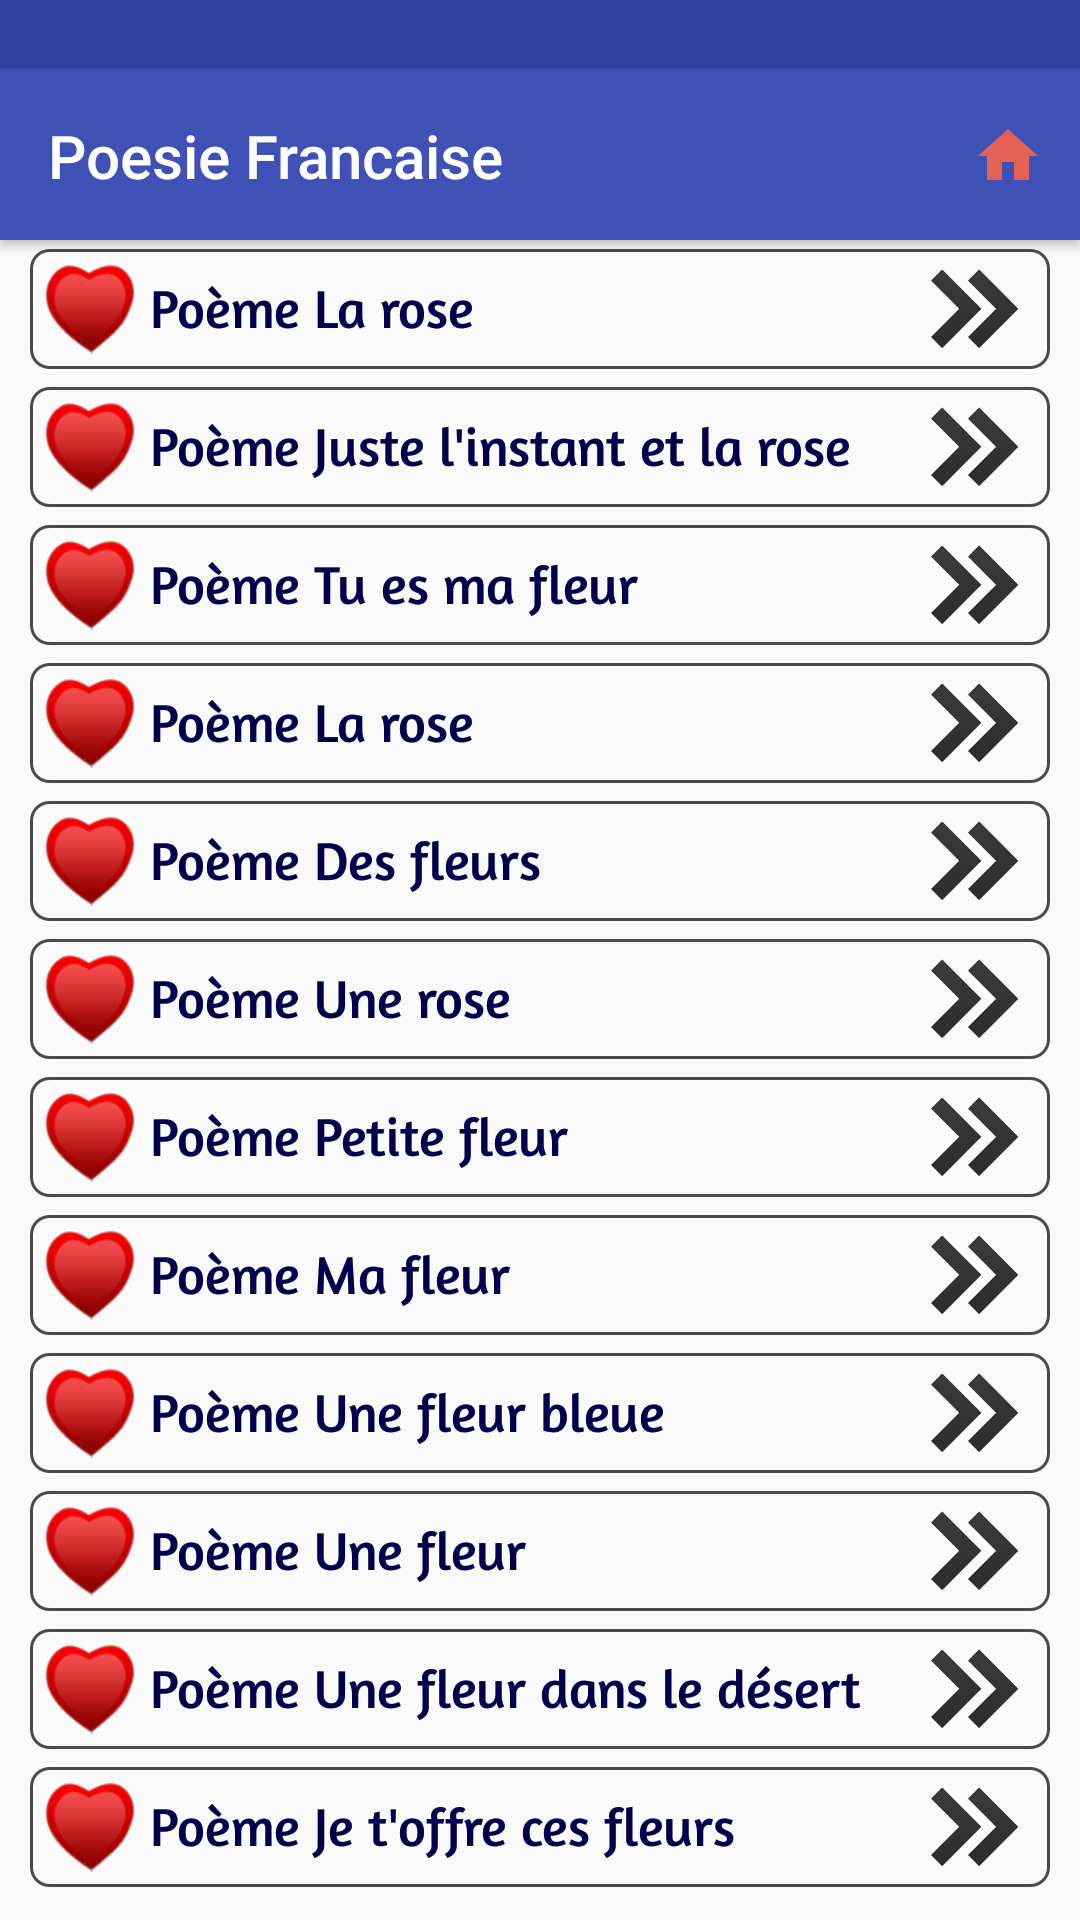 Poesie Francaise Apk 2 0 For Android Download Poesie Francaise Apk Latest Version From Apkfab Com